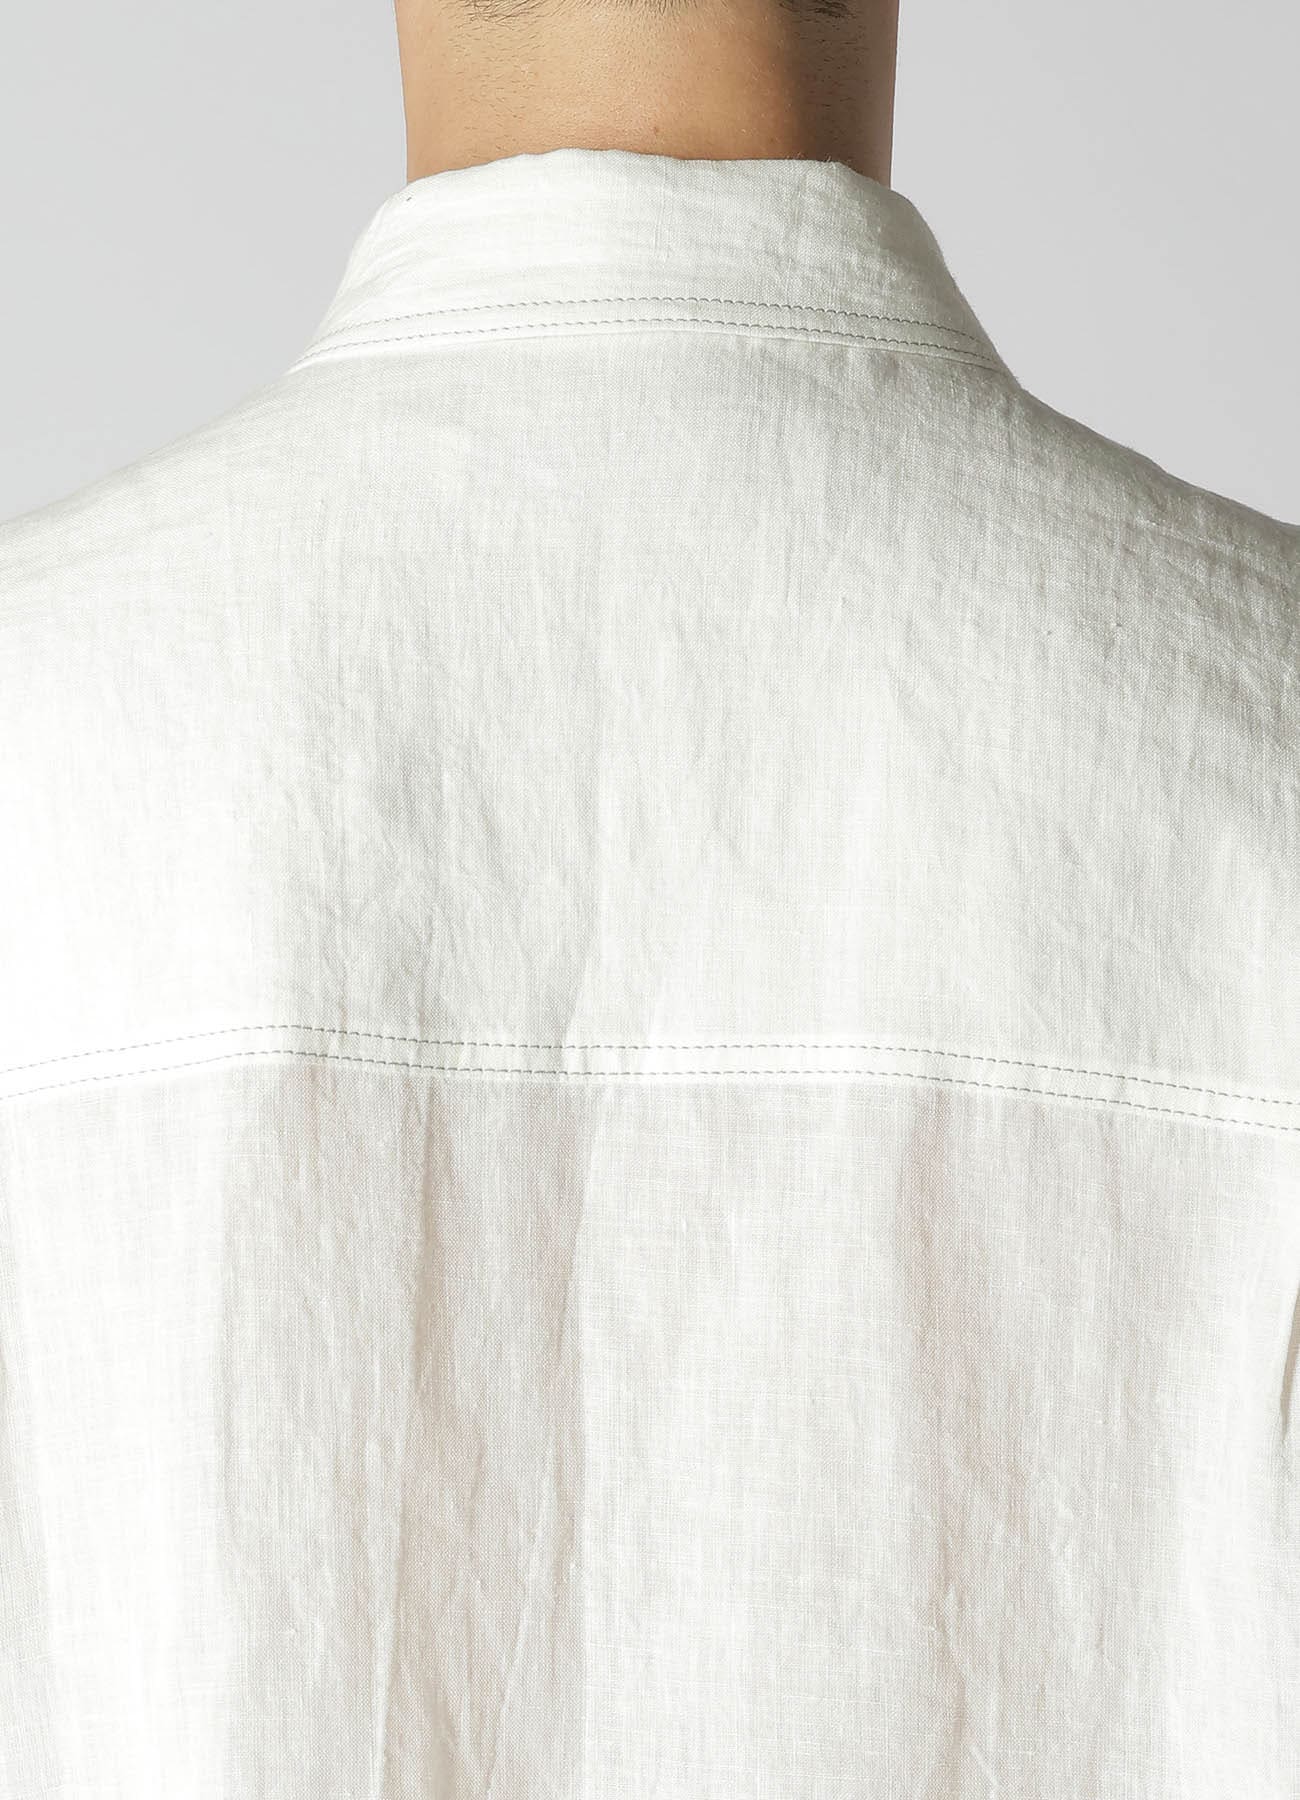 WHITE 60 LINEN LAWN SHIRT WITH DESIGN COLLAR AND COLOR COMBI STITCH